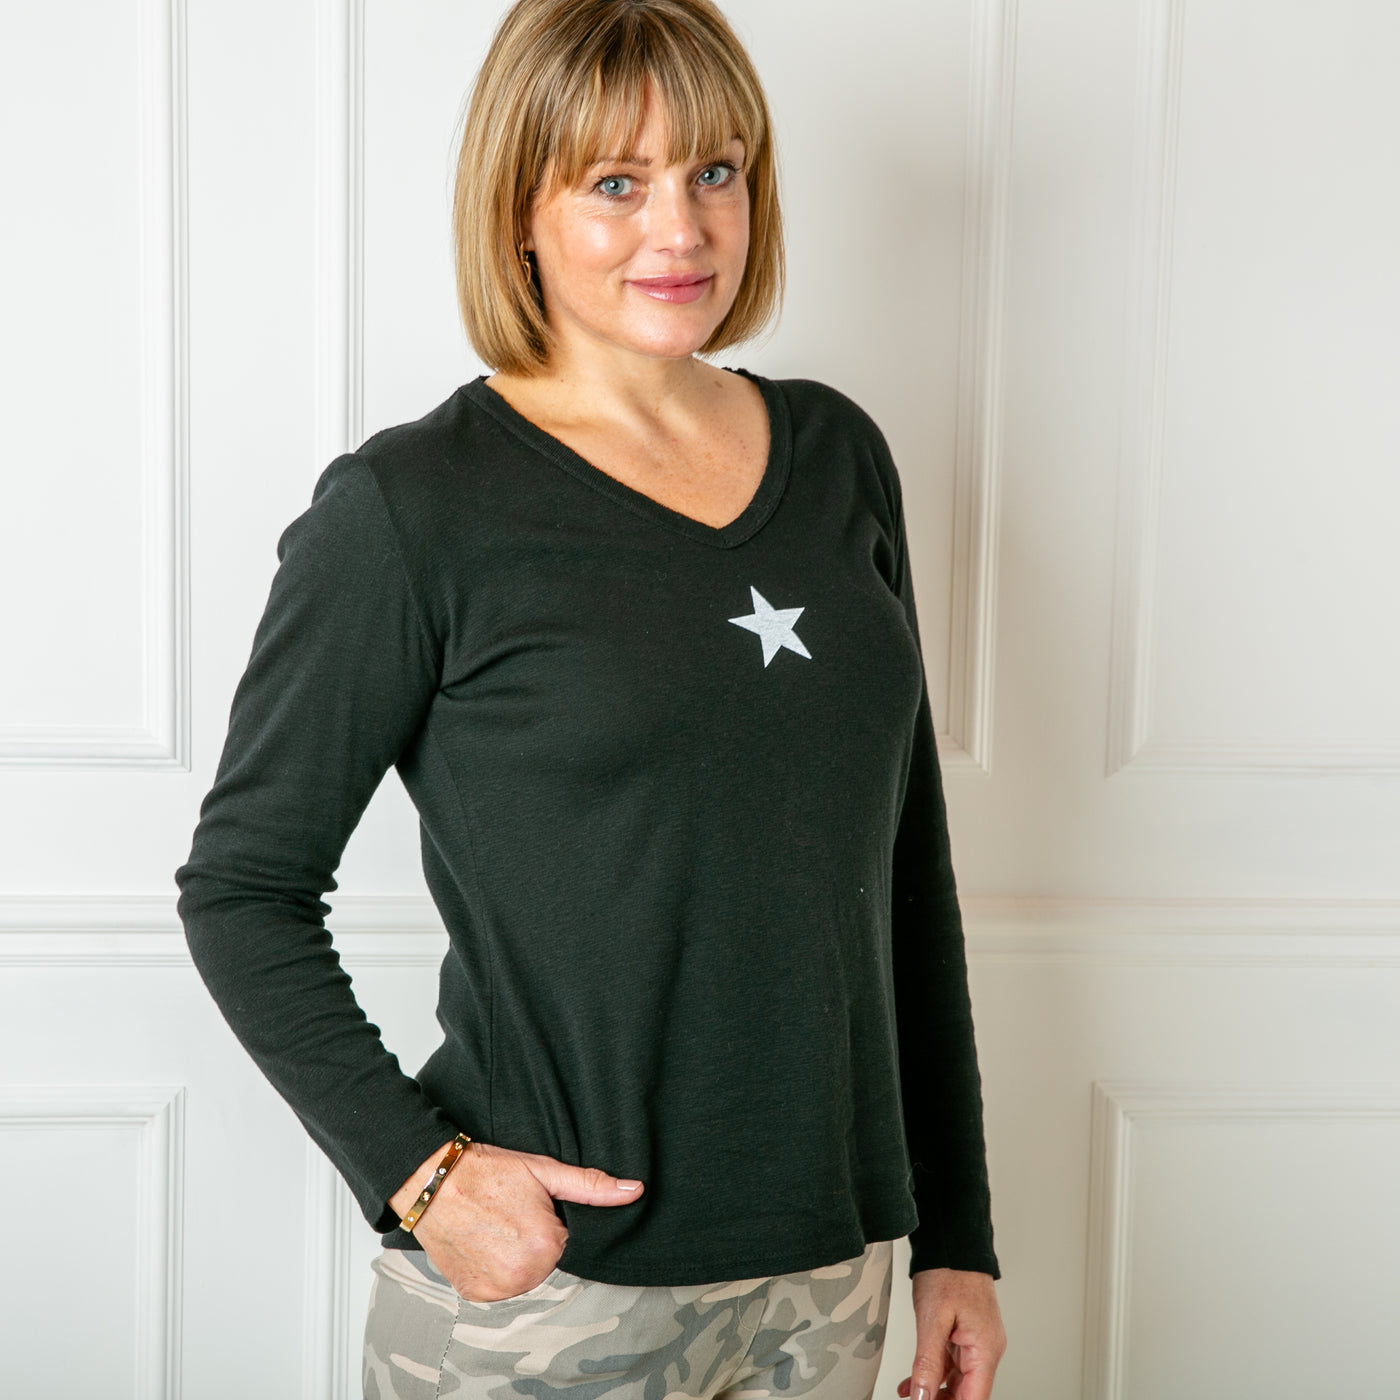 The black Long Sleeve Star Top with a v necklien and full length sleeves